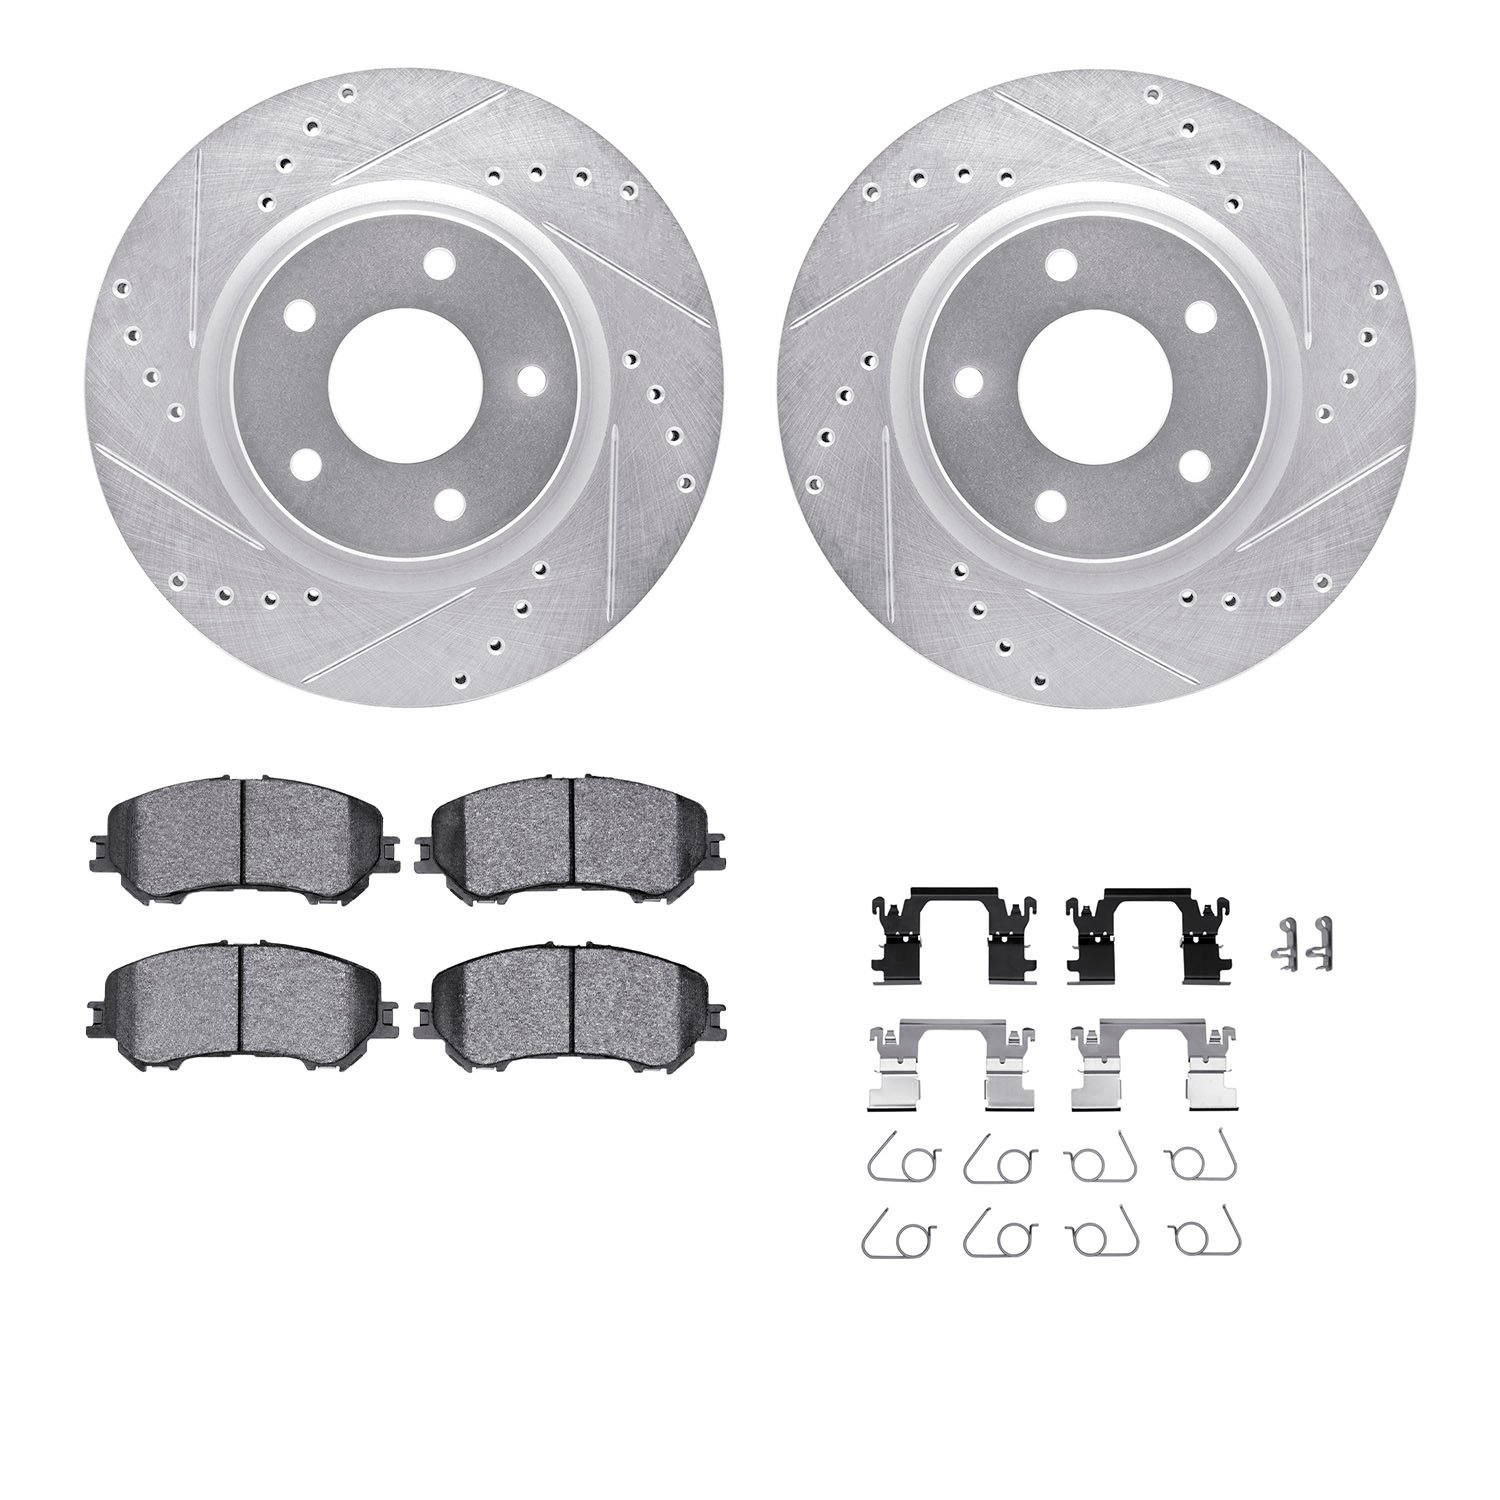 7312-67130 Drilled/Slotted Brake Rotor with 3000-Series Ceramic Brake Pads Kit & Hardware [Silver], Fits Select Multiple Makes/M